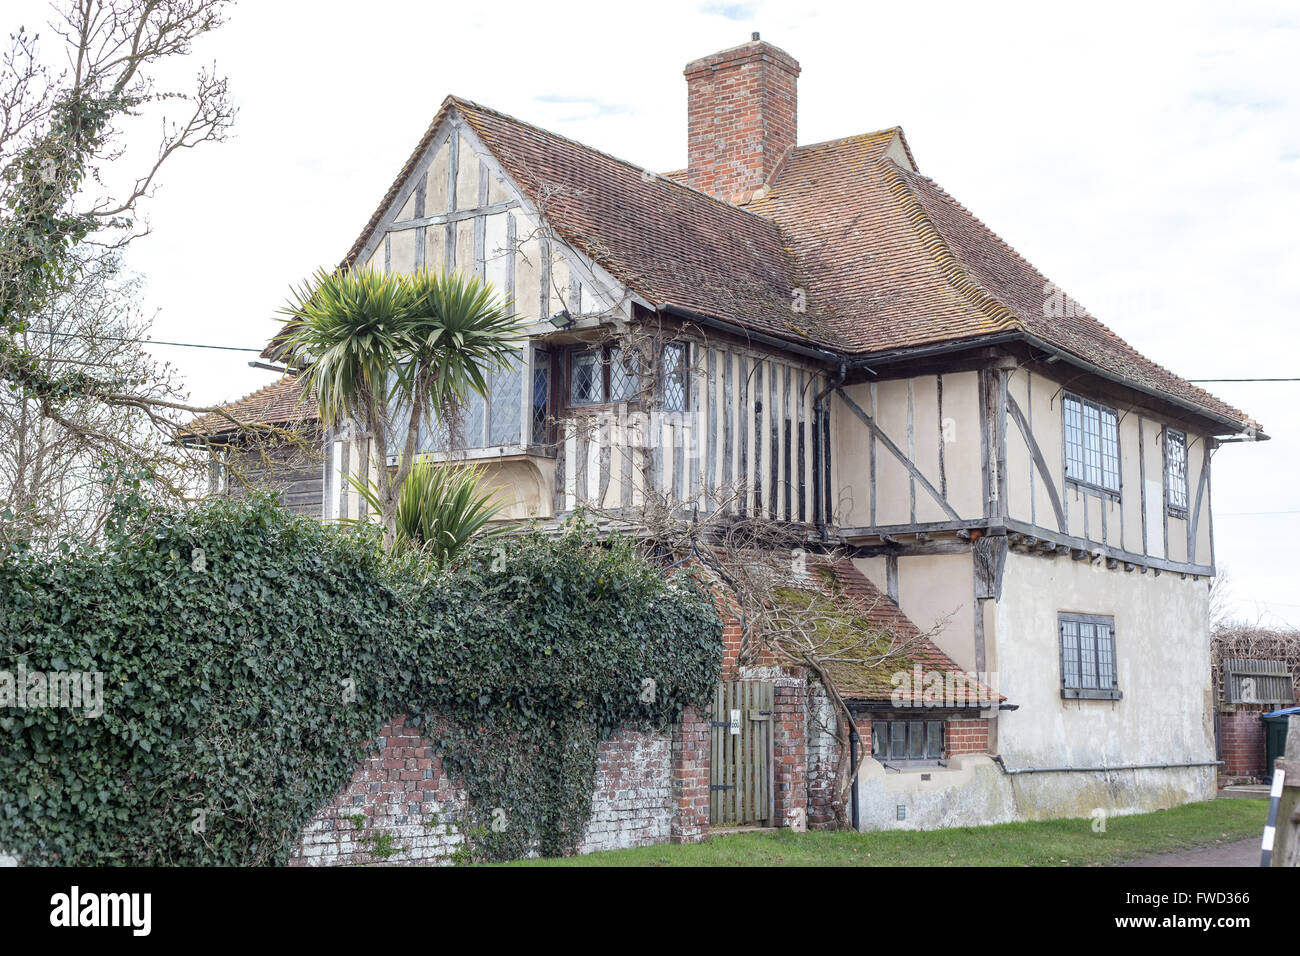 Ancient country farm house or manor house in Kent. Stock Photo